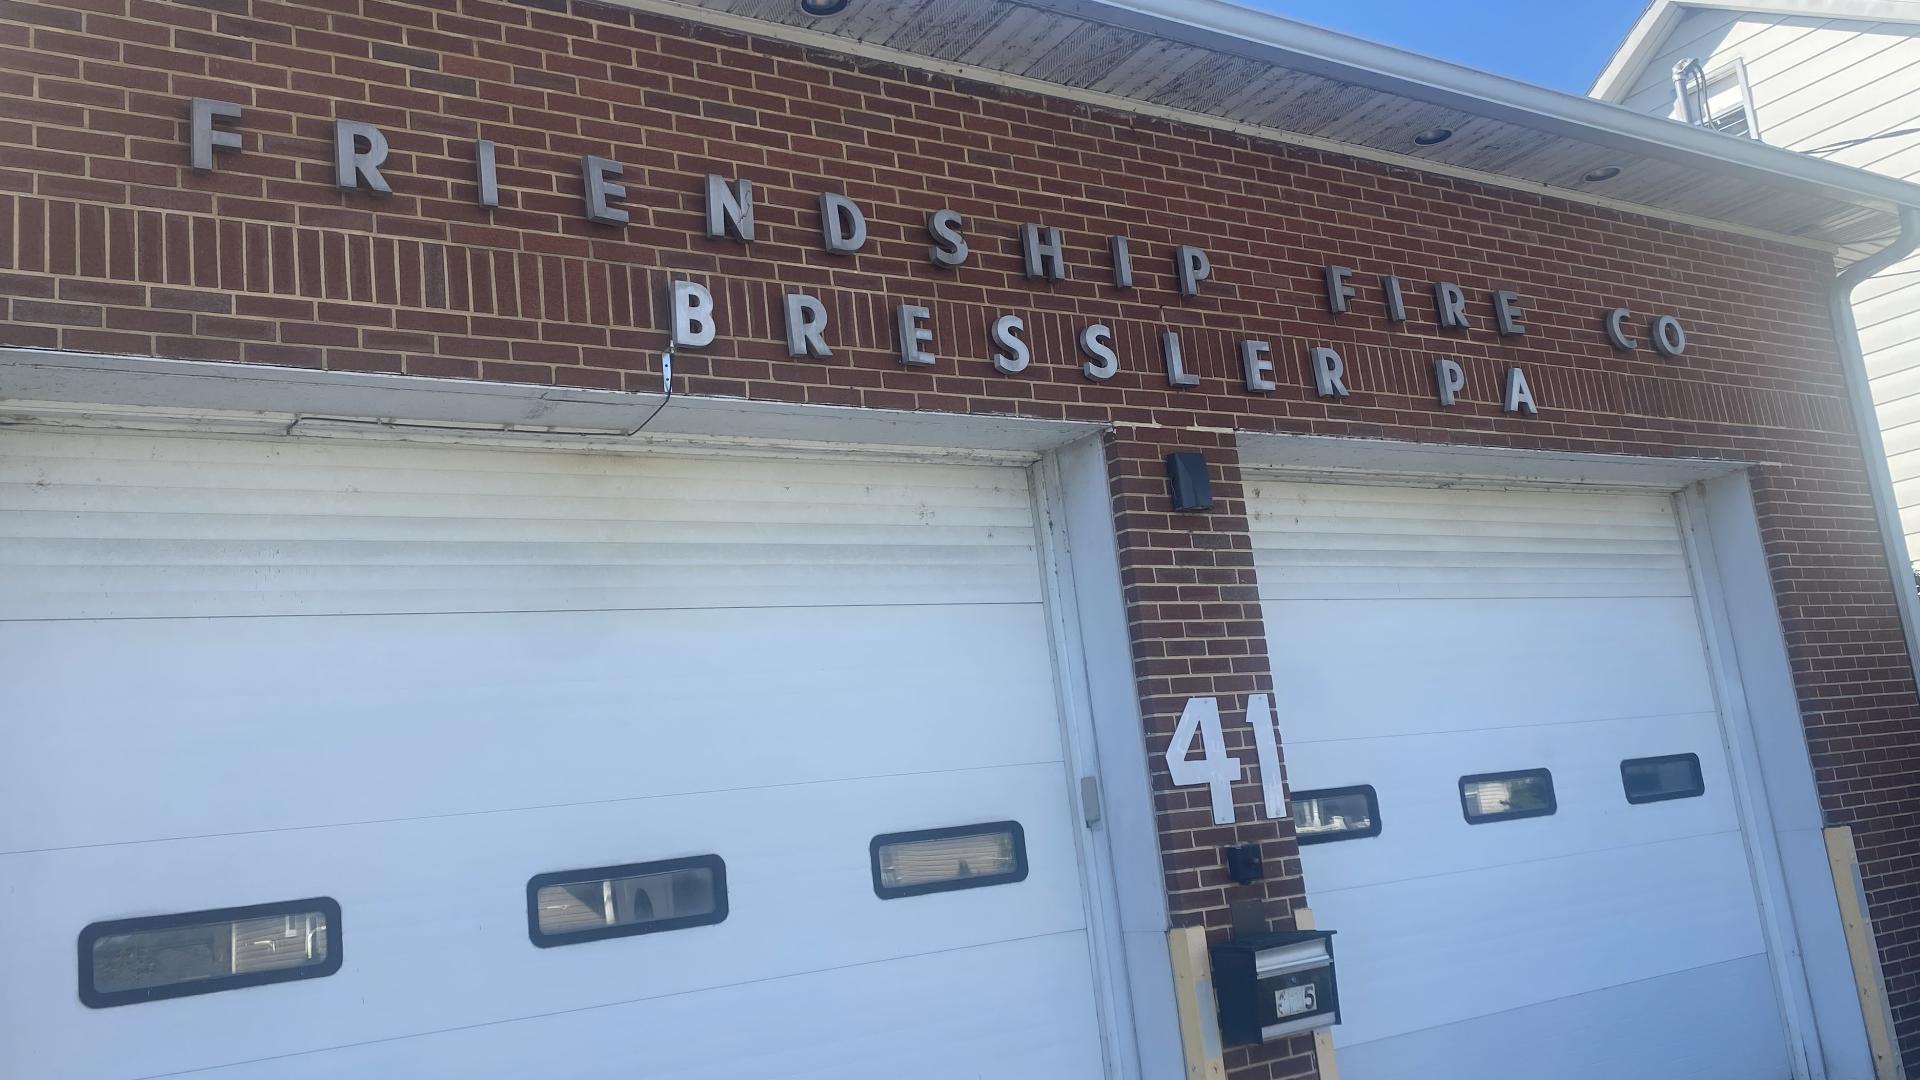 The board voted 3-0 with two abstentions to close the Bressler Friendship Fire Company.